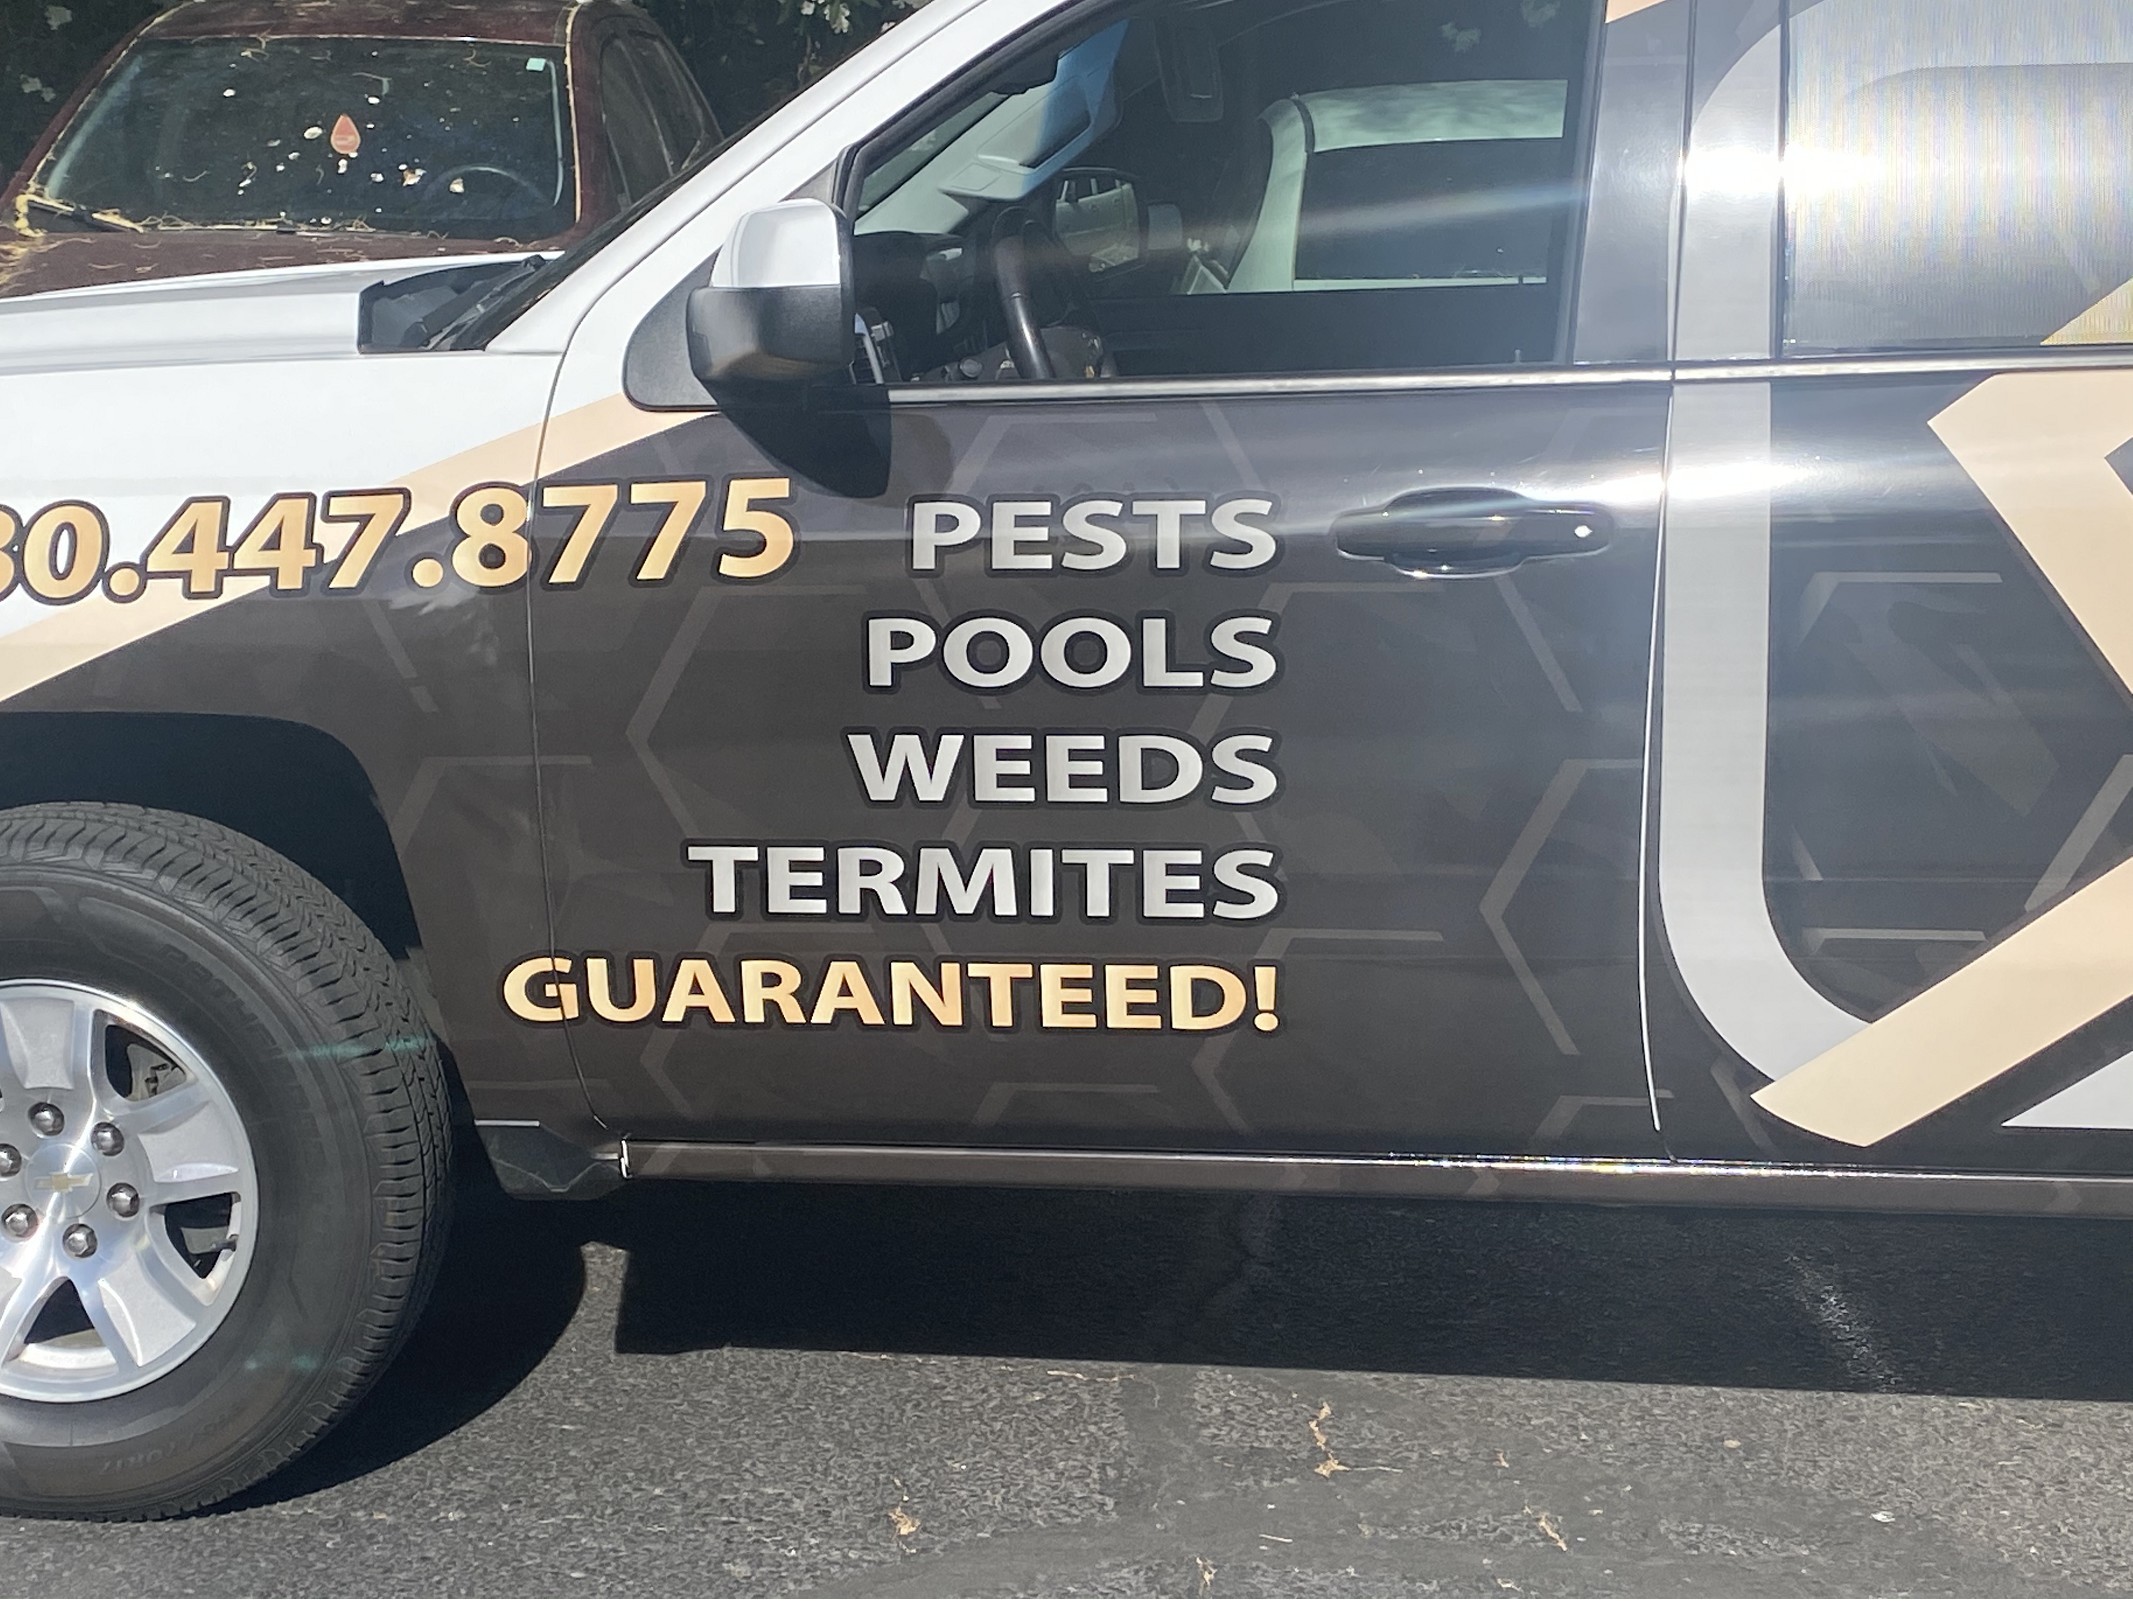 Briphen Pool Cleaning & Pest Control Tempe